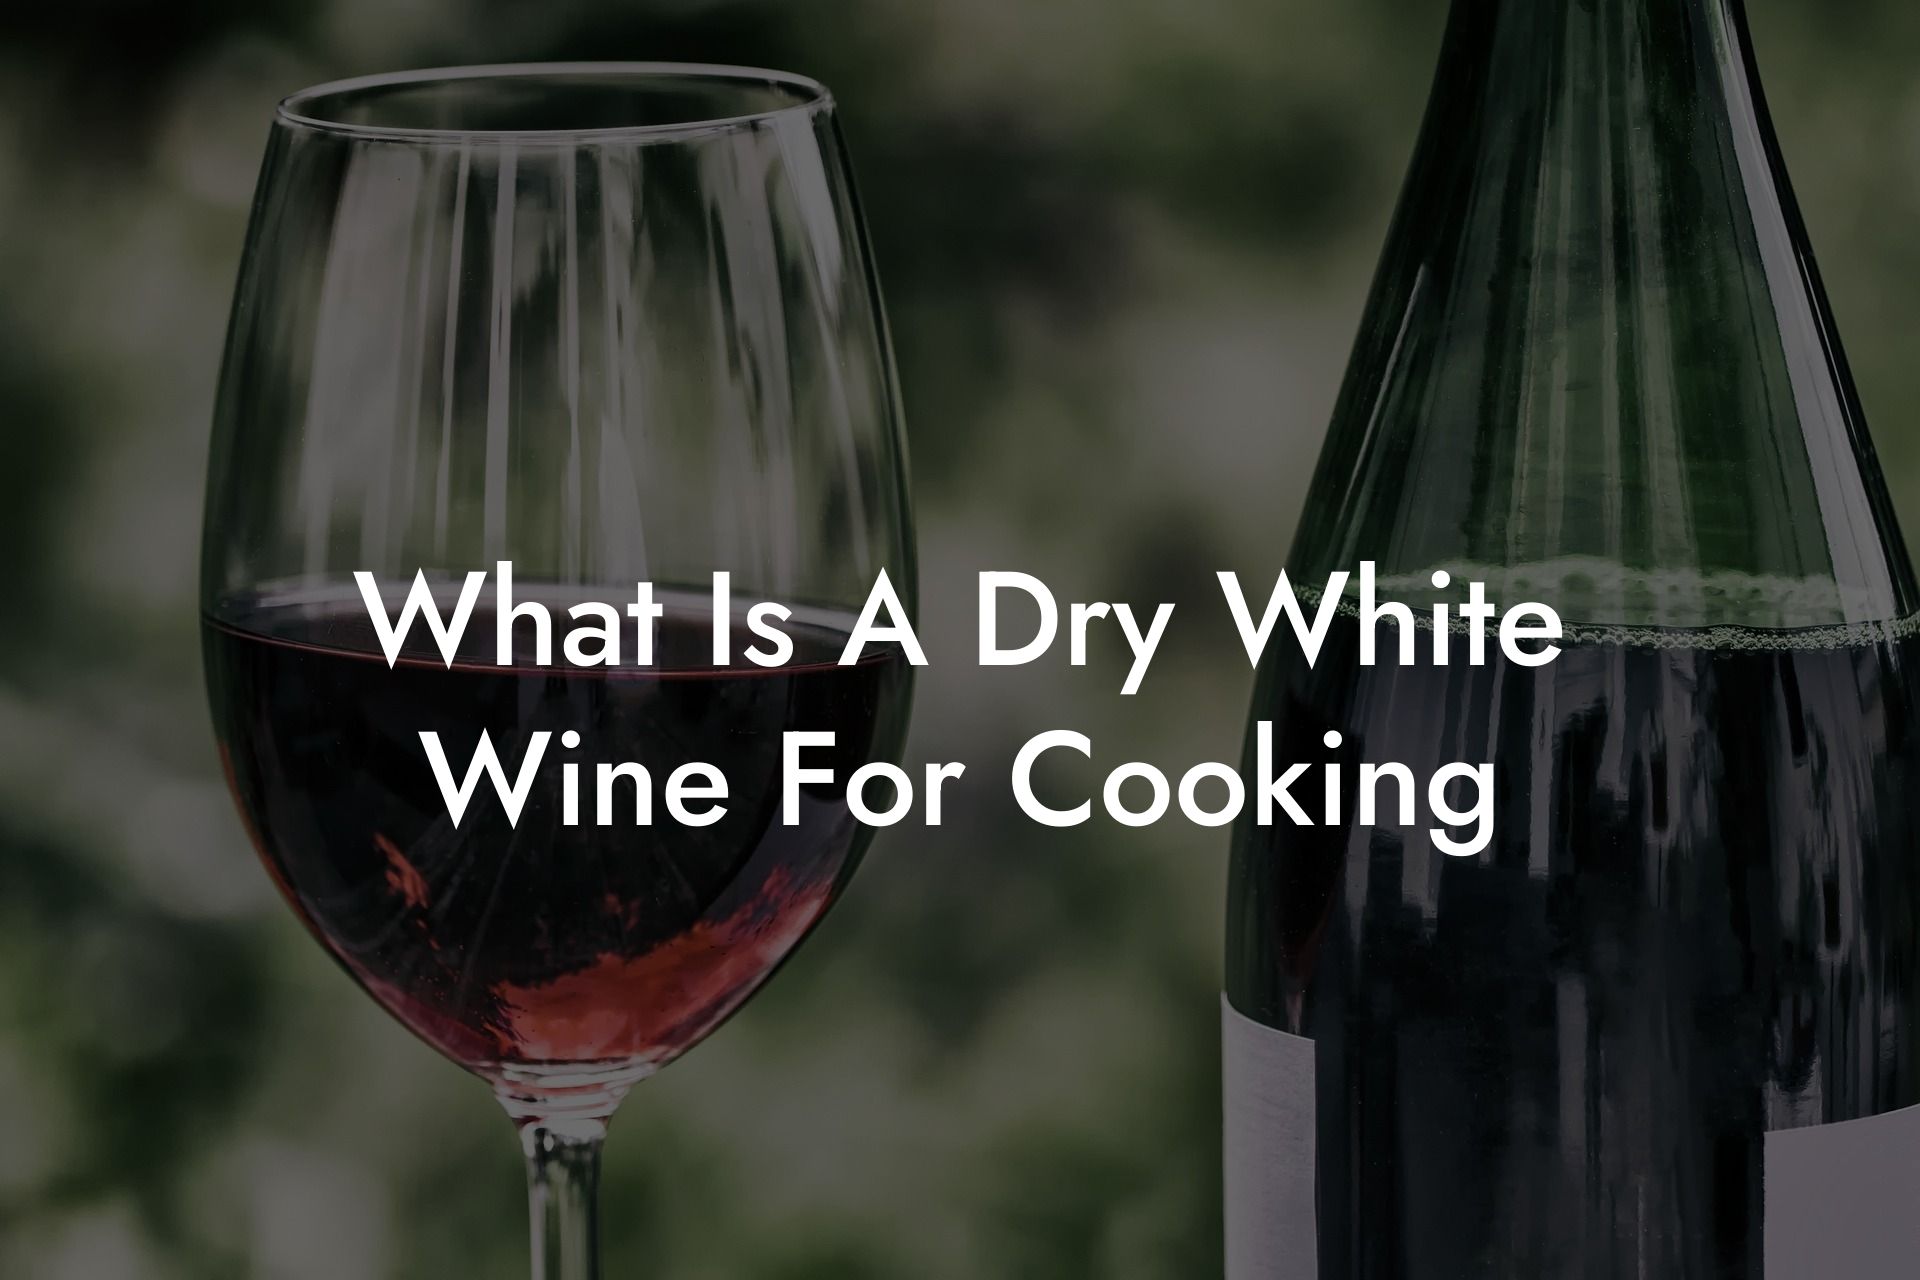 What Is A Dry White Wine For Cooking